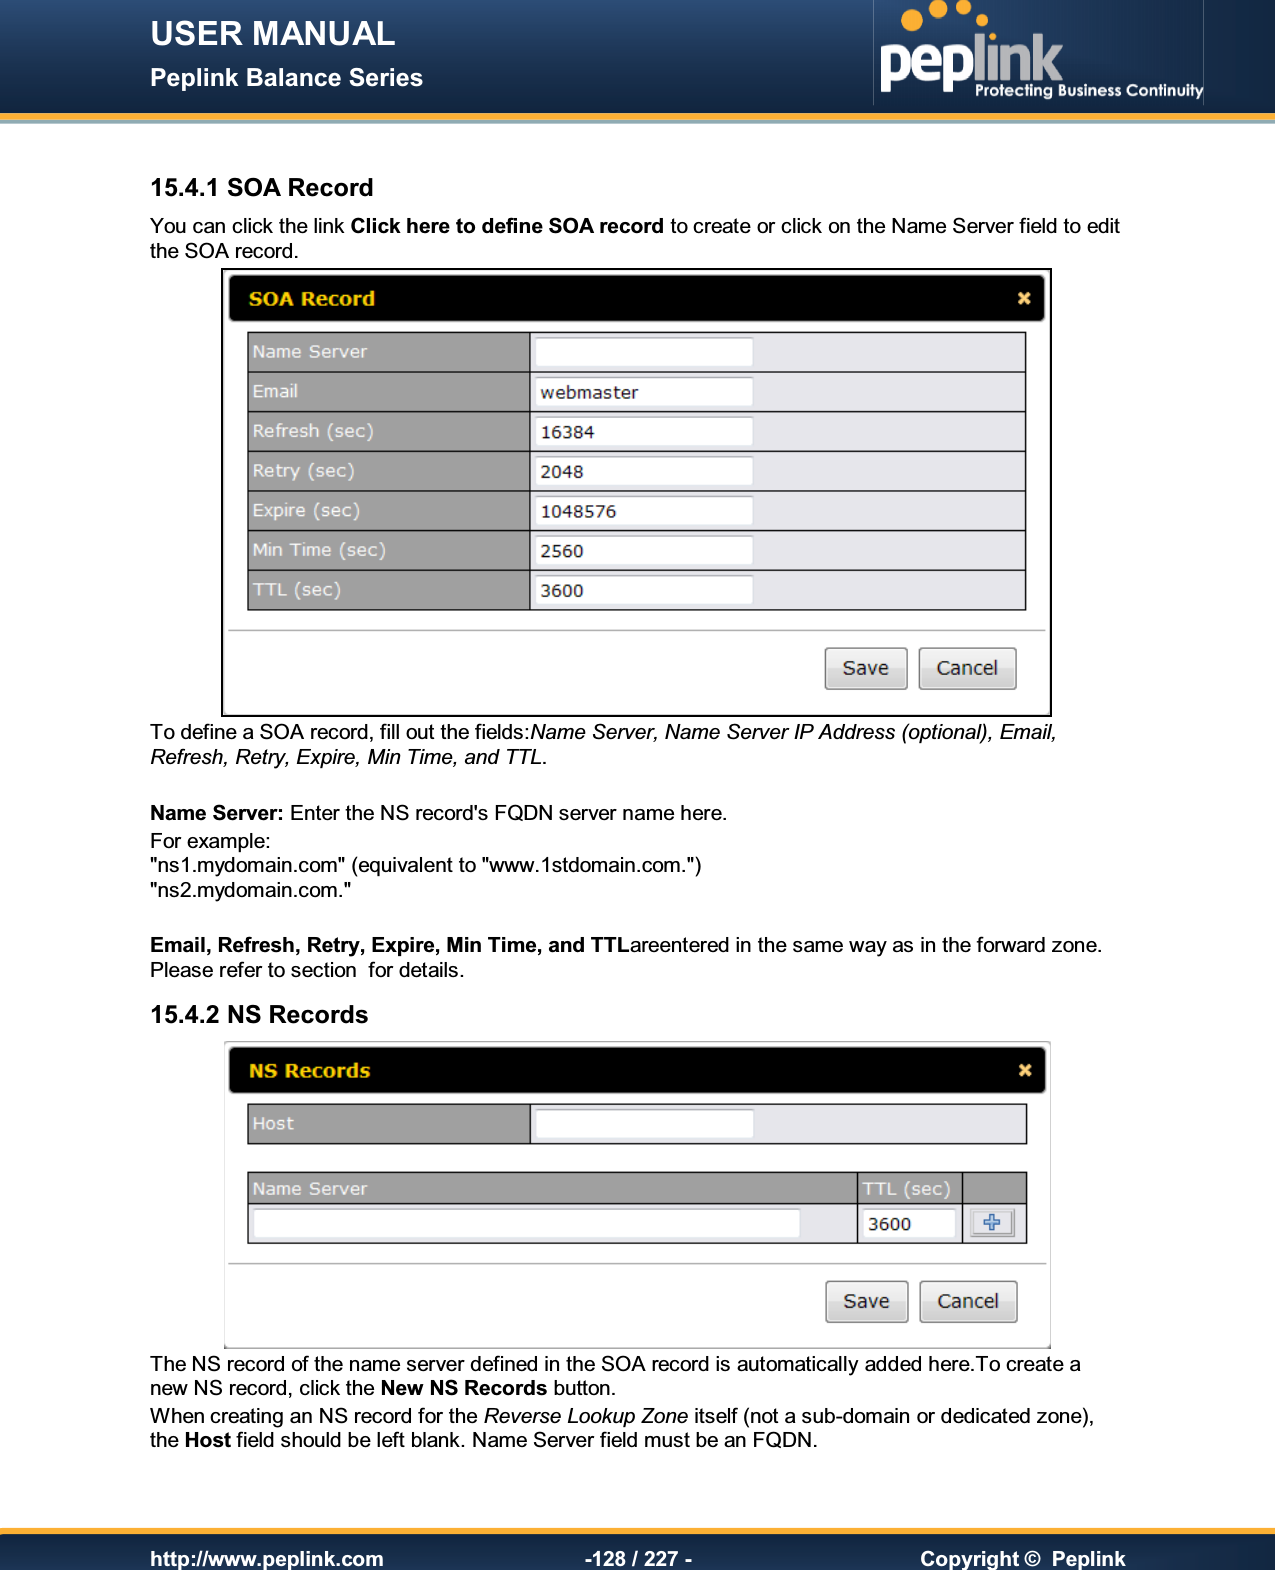 USER MANUAL Peplink Balance Series   http://www.peplink.com -128 / 227 -  Copyright ©  Peplink  15.4.1 SOA Record You can click the link Click here to define SOA record to create or click on the Name Server field to edit the SOA record.  To define a SOA record, fill out the fields:Name Server, Name Server IP Address (optional), Email, Refresh, Retry, Expire, Min Time, and TTL.  Name Server: Enter the NS record&apos;s FQDN server name here.  For example: &quot;ns1.mydomain.com&quot; (equivalent to &quot;www.1stdomain.com.&quot;) &quot;ns2.mydomain.com.&quot;  Email, Refresh, Retry, Expire, Min Time, and TTLareentered in the same way as in the forward zone. Please refer to section  for details. 15.4.2 NS Records  The NS record of the name server defined in the SOA record is automatically added here.To create a new NS record, click the New NS Records button.   When creating an NS record for the Reverse Lookup Zone itself (not a sub-domain or dedicated zone), the Host field should be left blank. Name Server field must be an FQDN.  